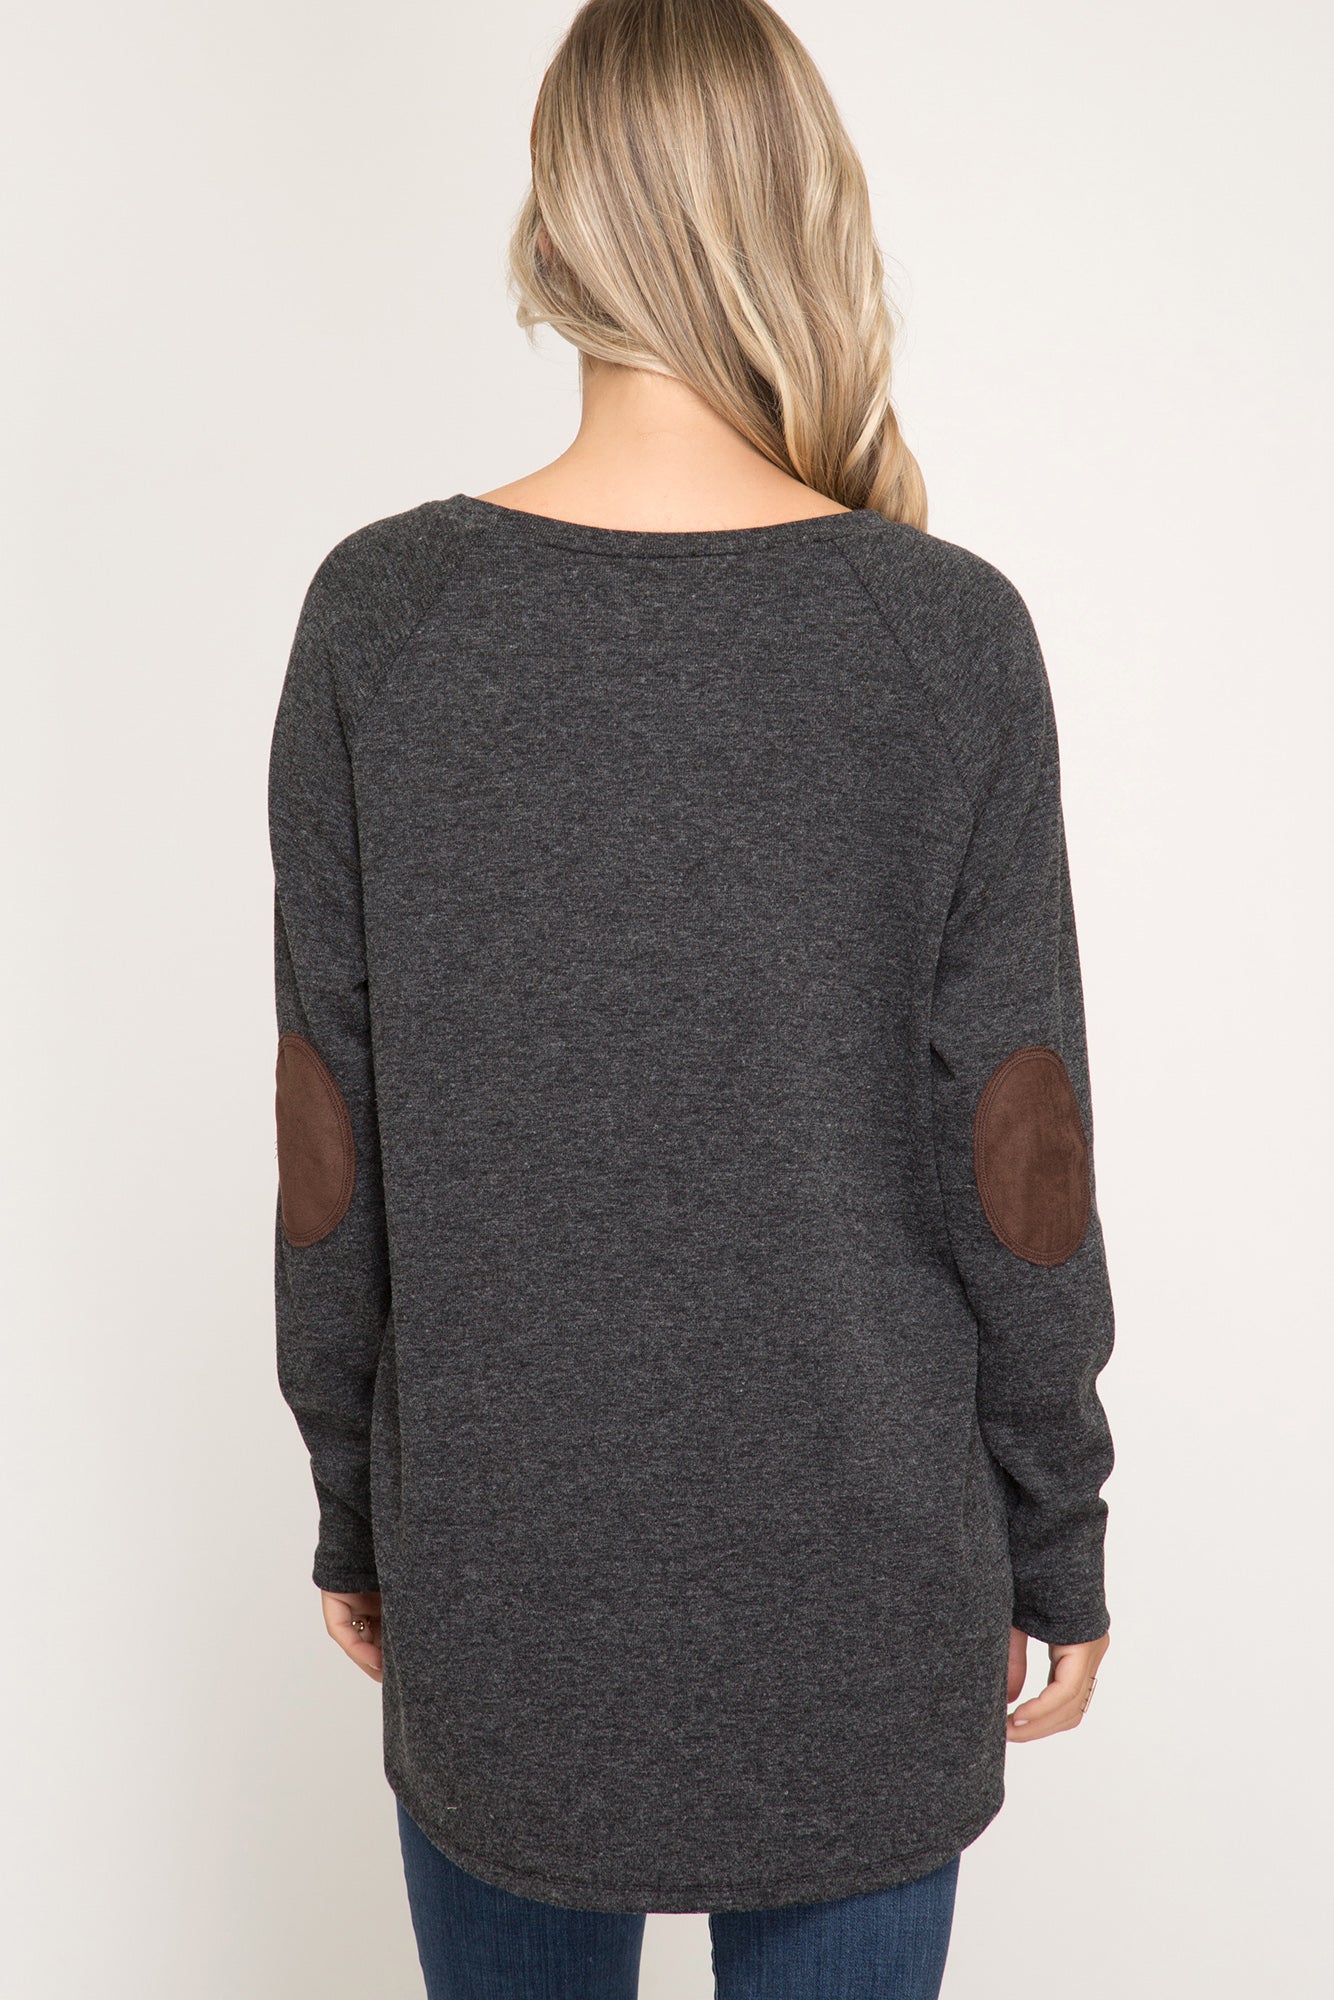 Long Sleeve Terry Knit With Faux Suede Button Details!